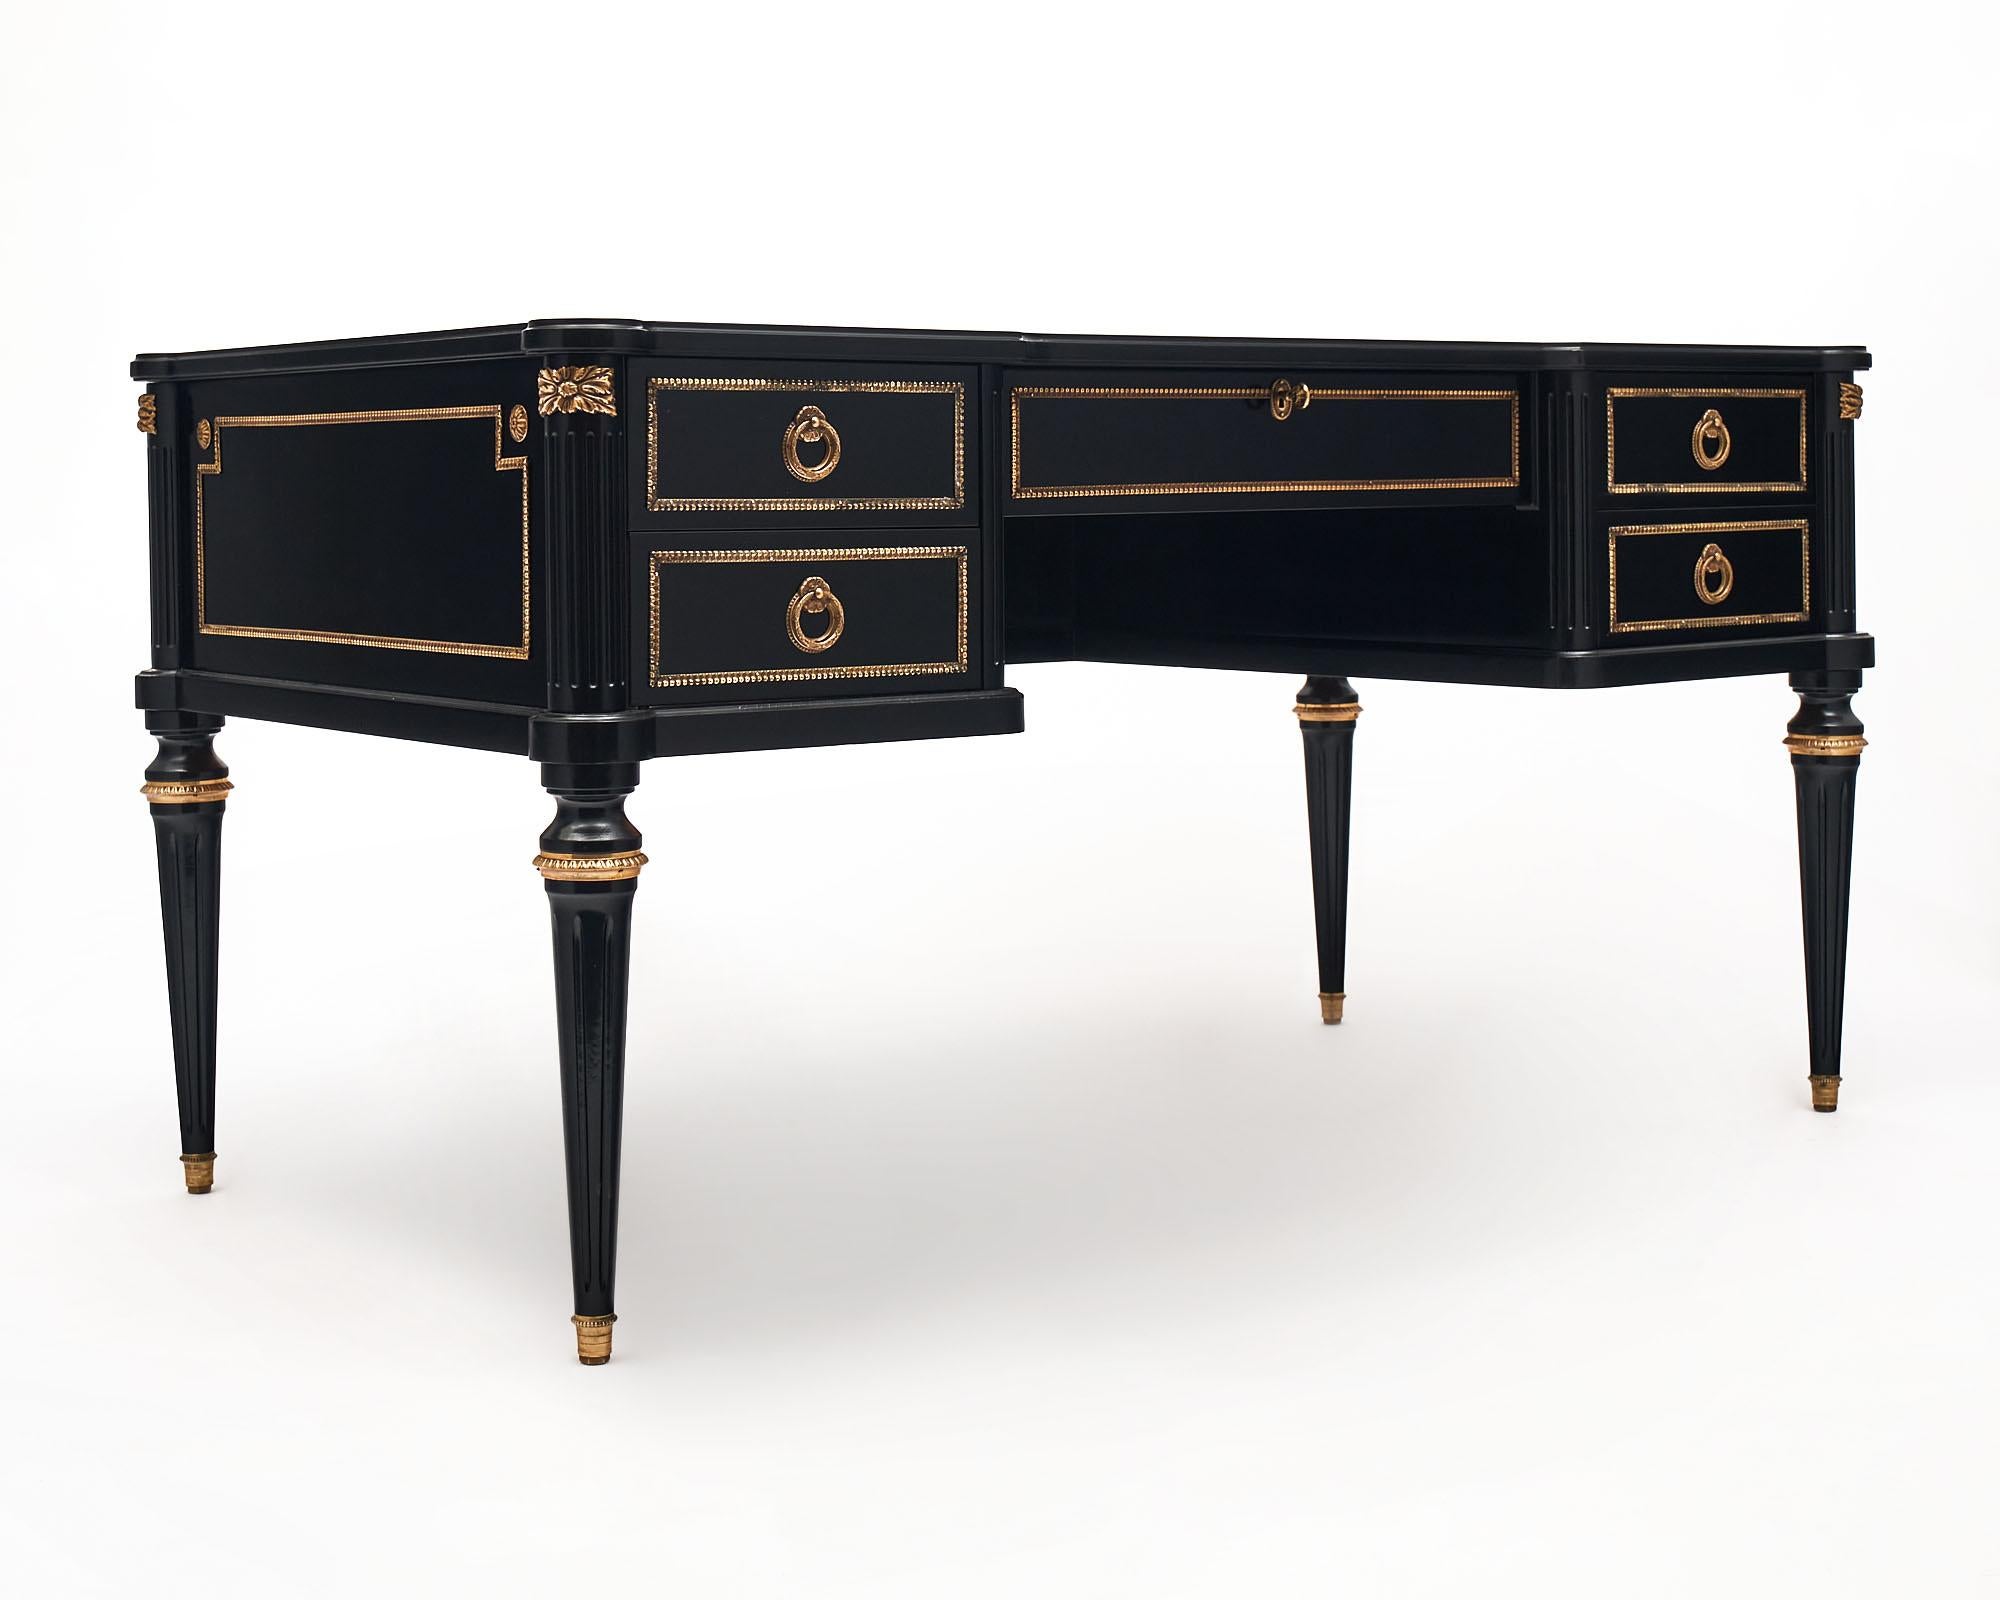 Desk from France in the Louis XVI style. This antique piece has been ebonized and finished with a lustrous French polish. The top has a black leather writing surface, featuring gold leaf trim. There are five dovetailed drawers each showcasing a gilt